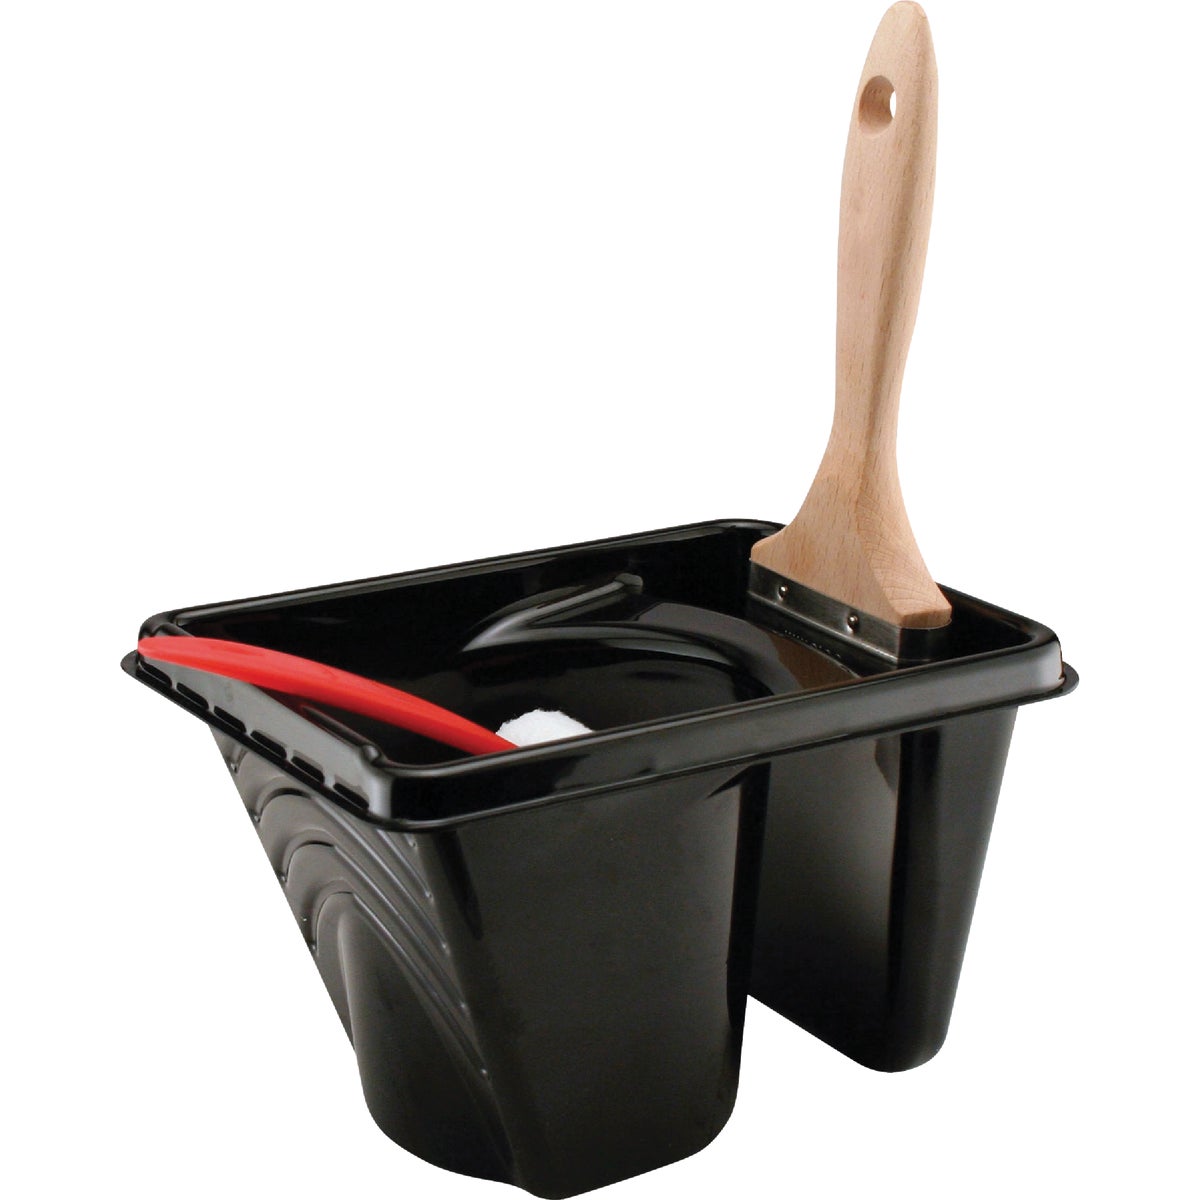 Item 778510, A handy trim tray for small paint projects or touch ups.